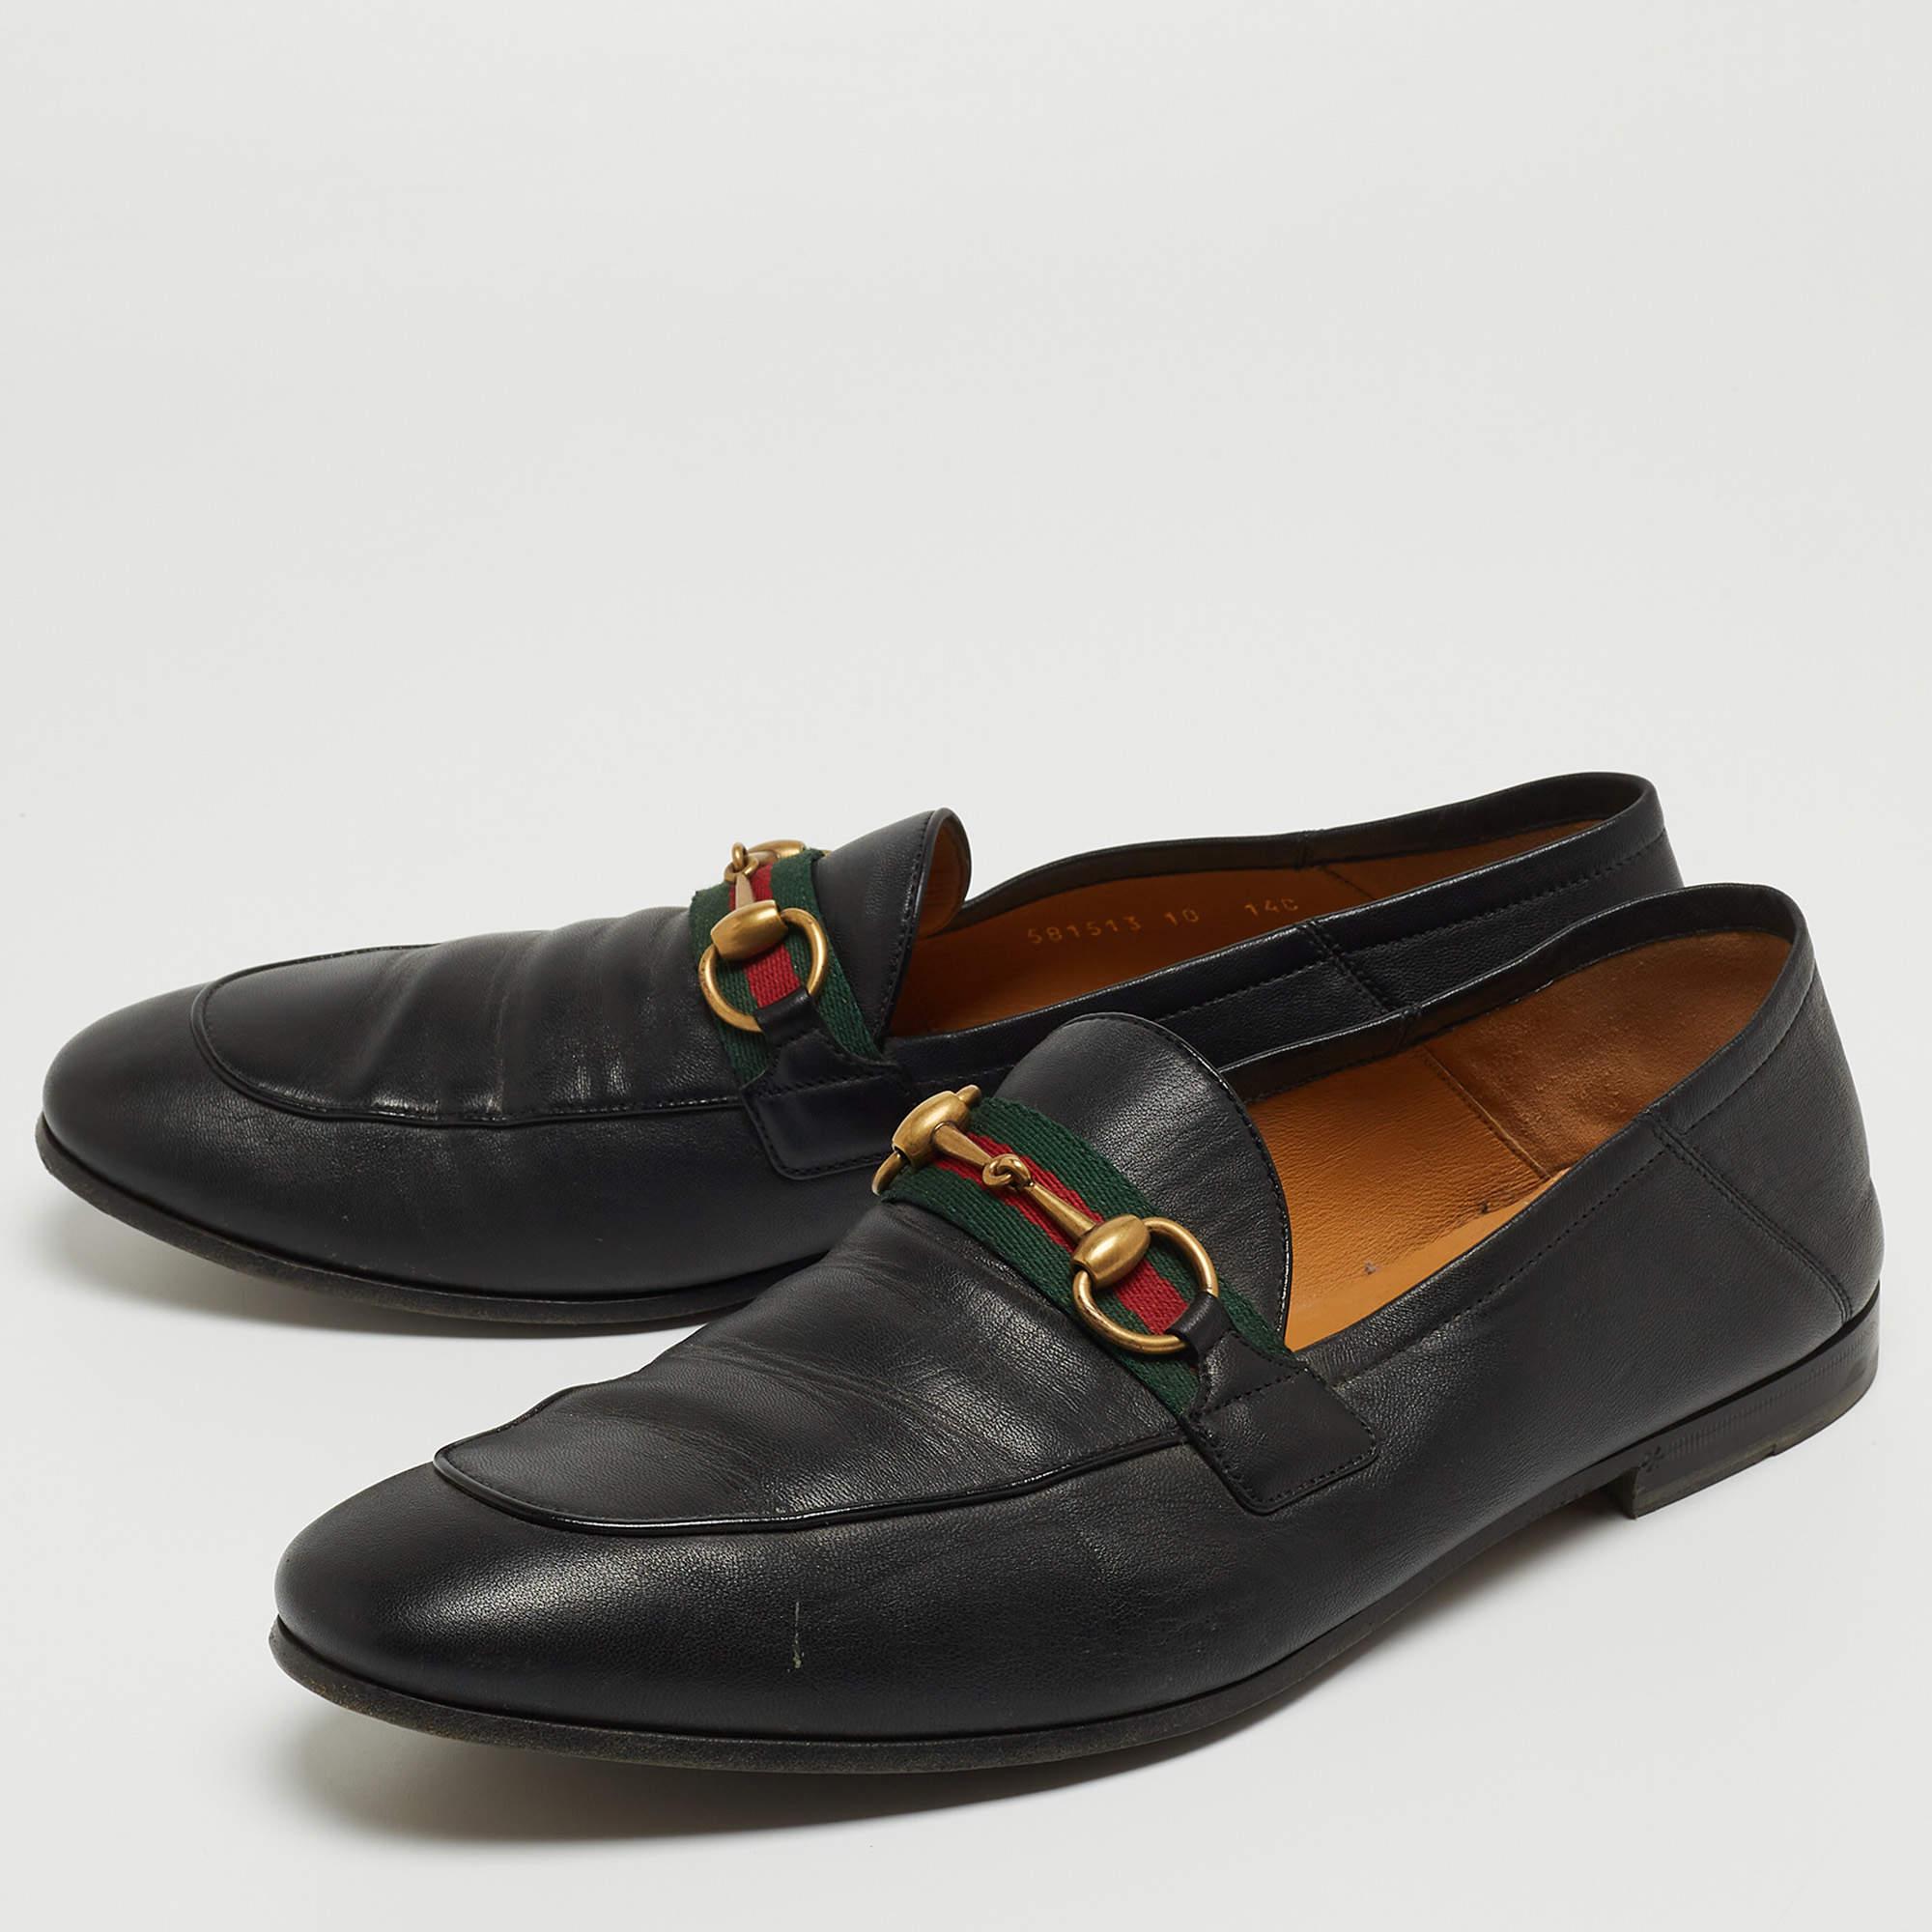 Complement your well-put-together outfit with these loafers by Gucci. Minimal and classy, they have an amazing construction for enduring quality and comfortable fit.

